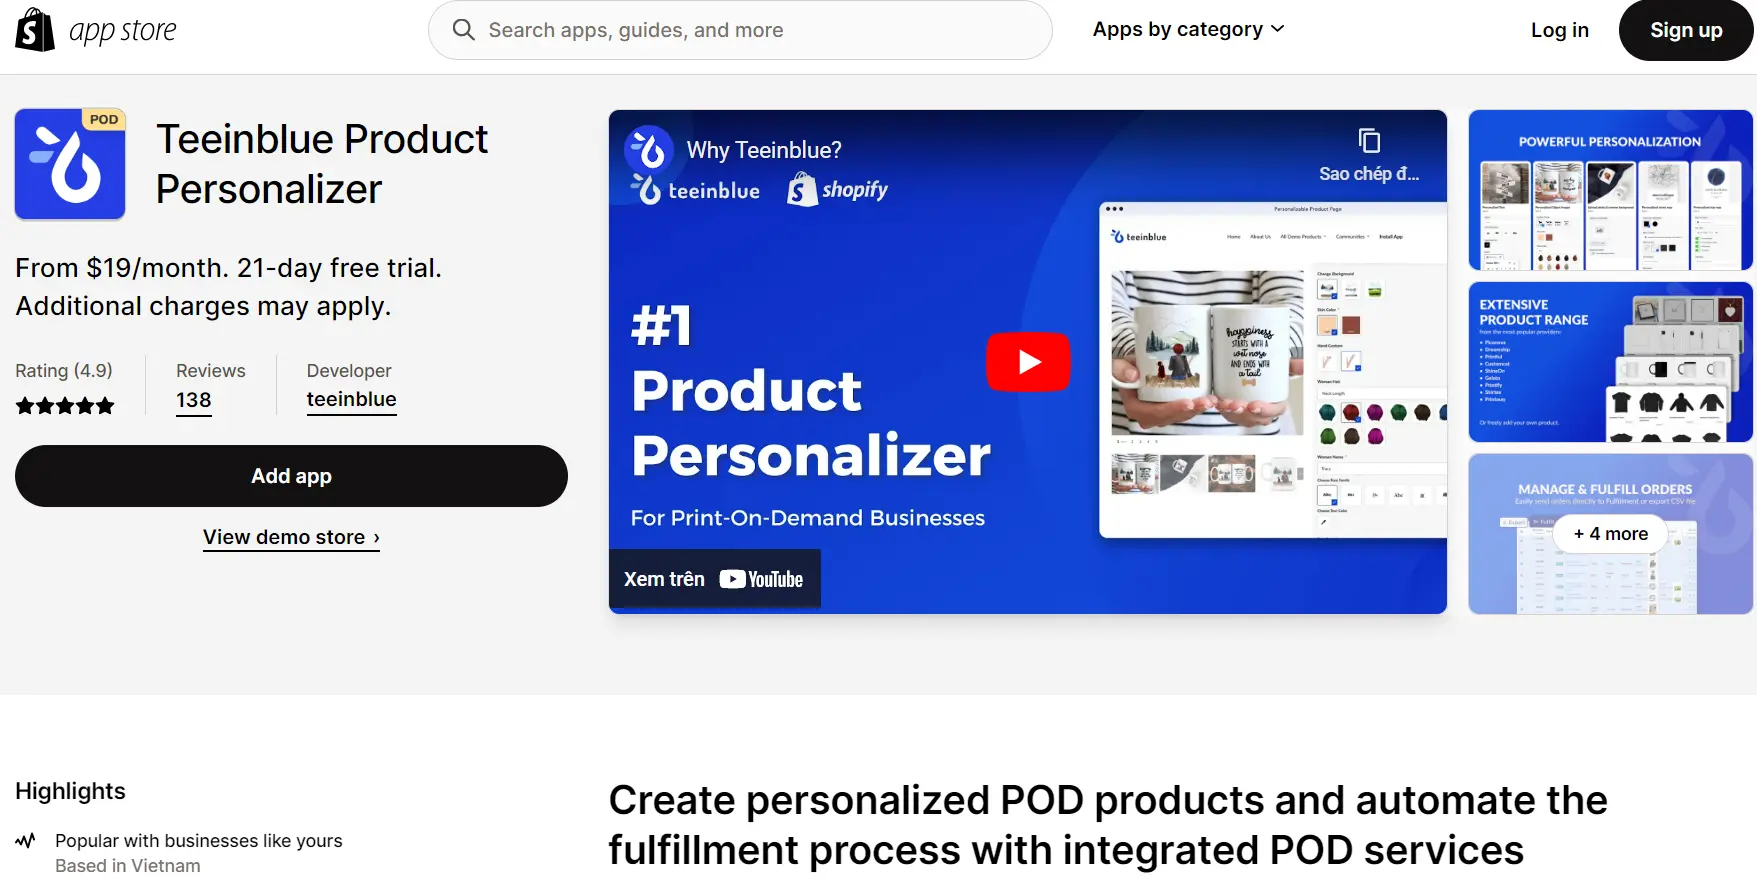 Teeinblue Product Personalizer: best print on demand apps for shopify